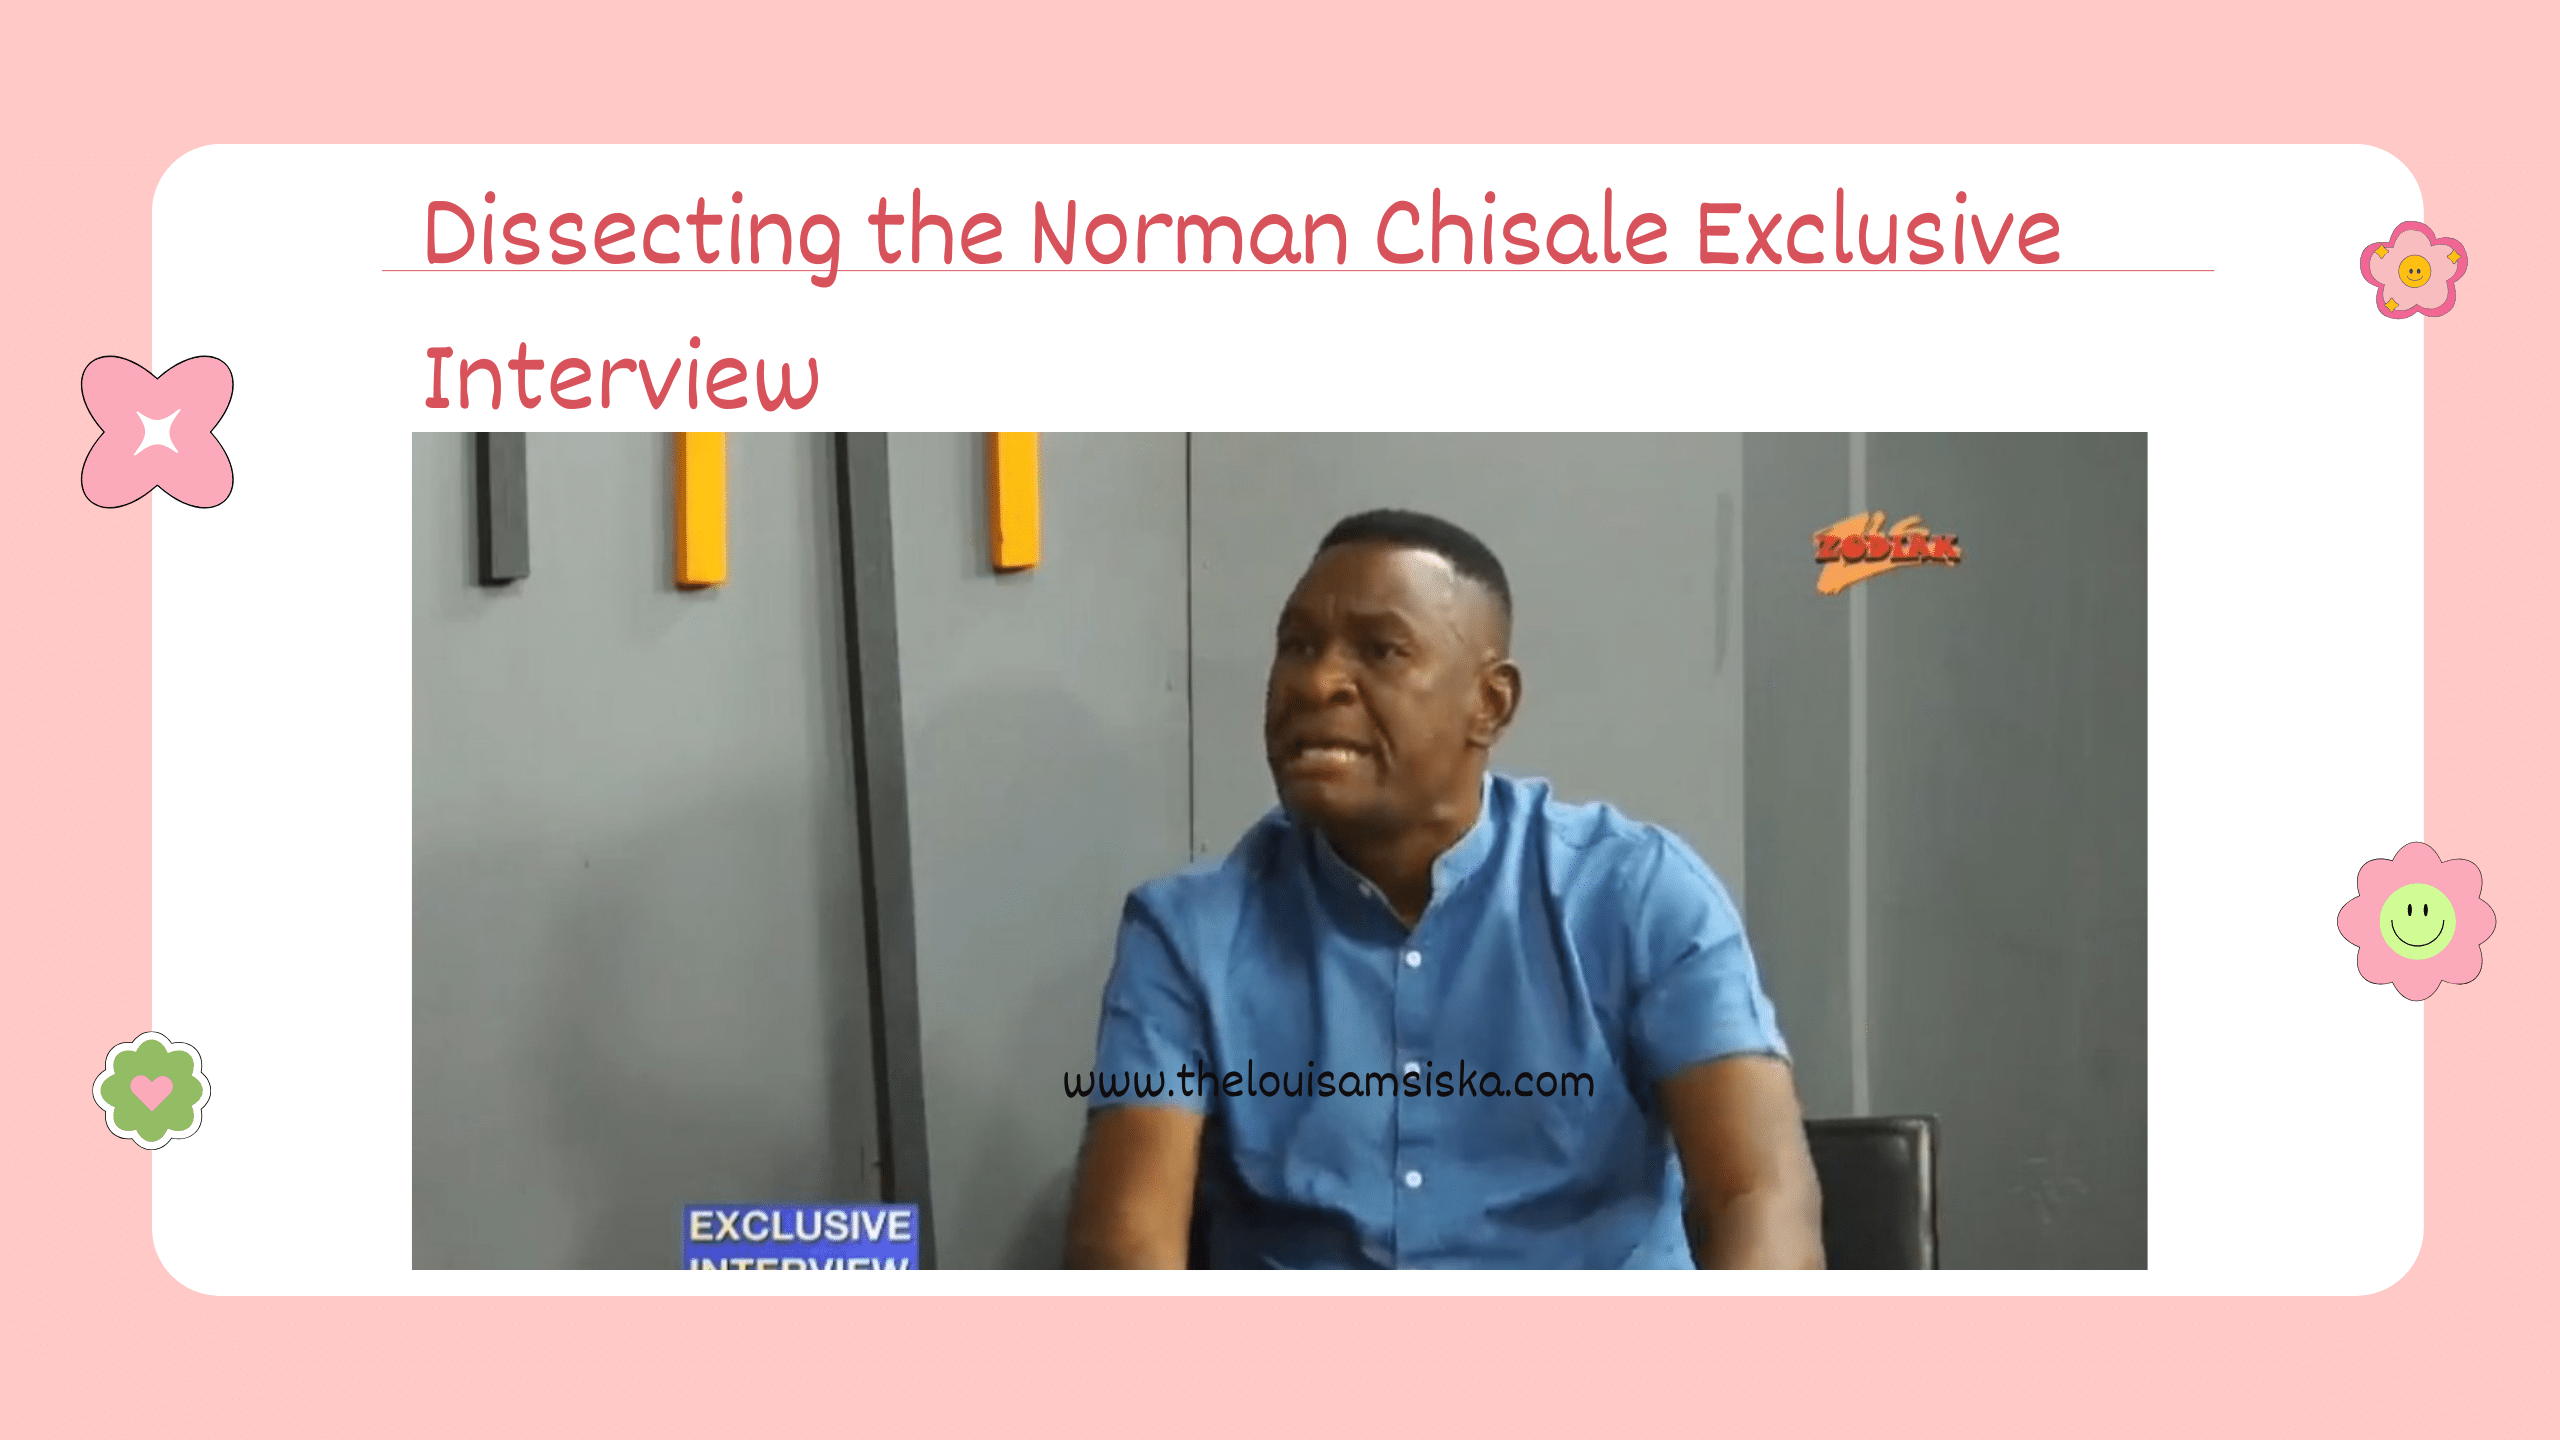 Dissecting the Norman Chisale Exclusive Interview